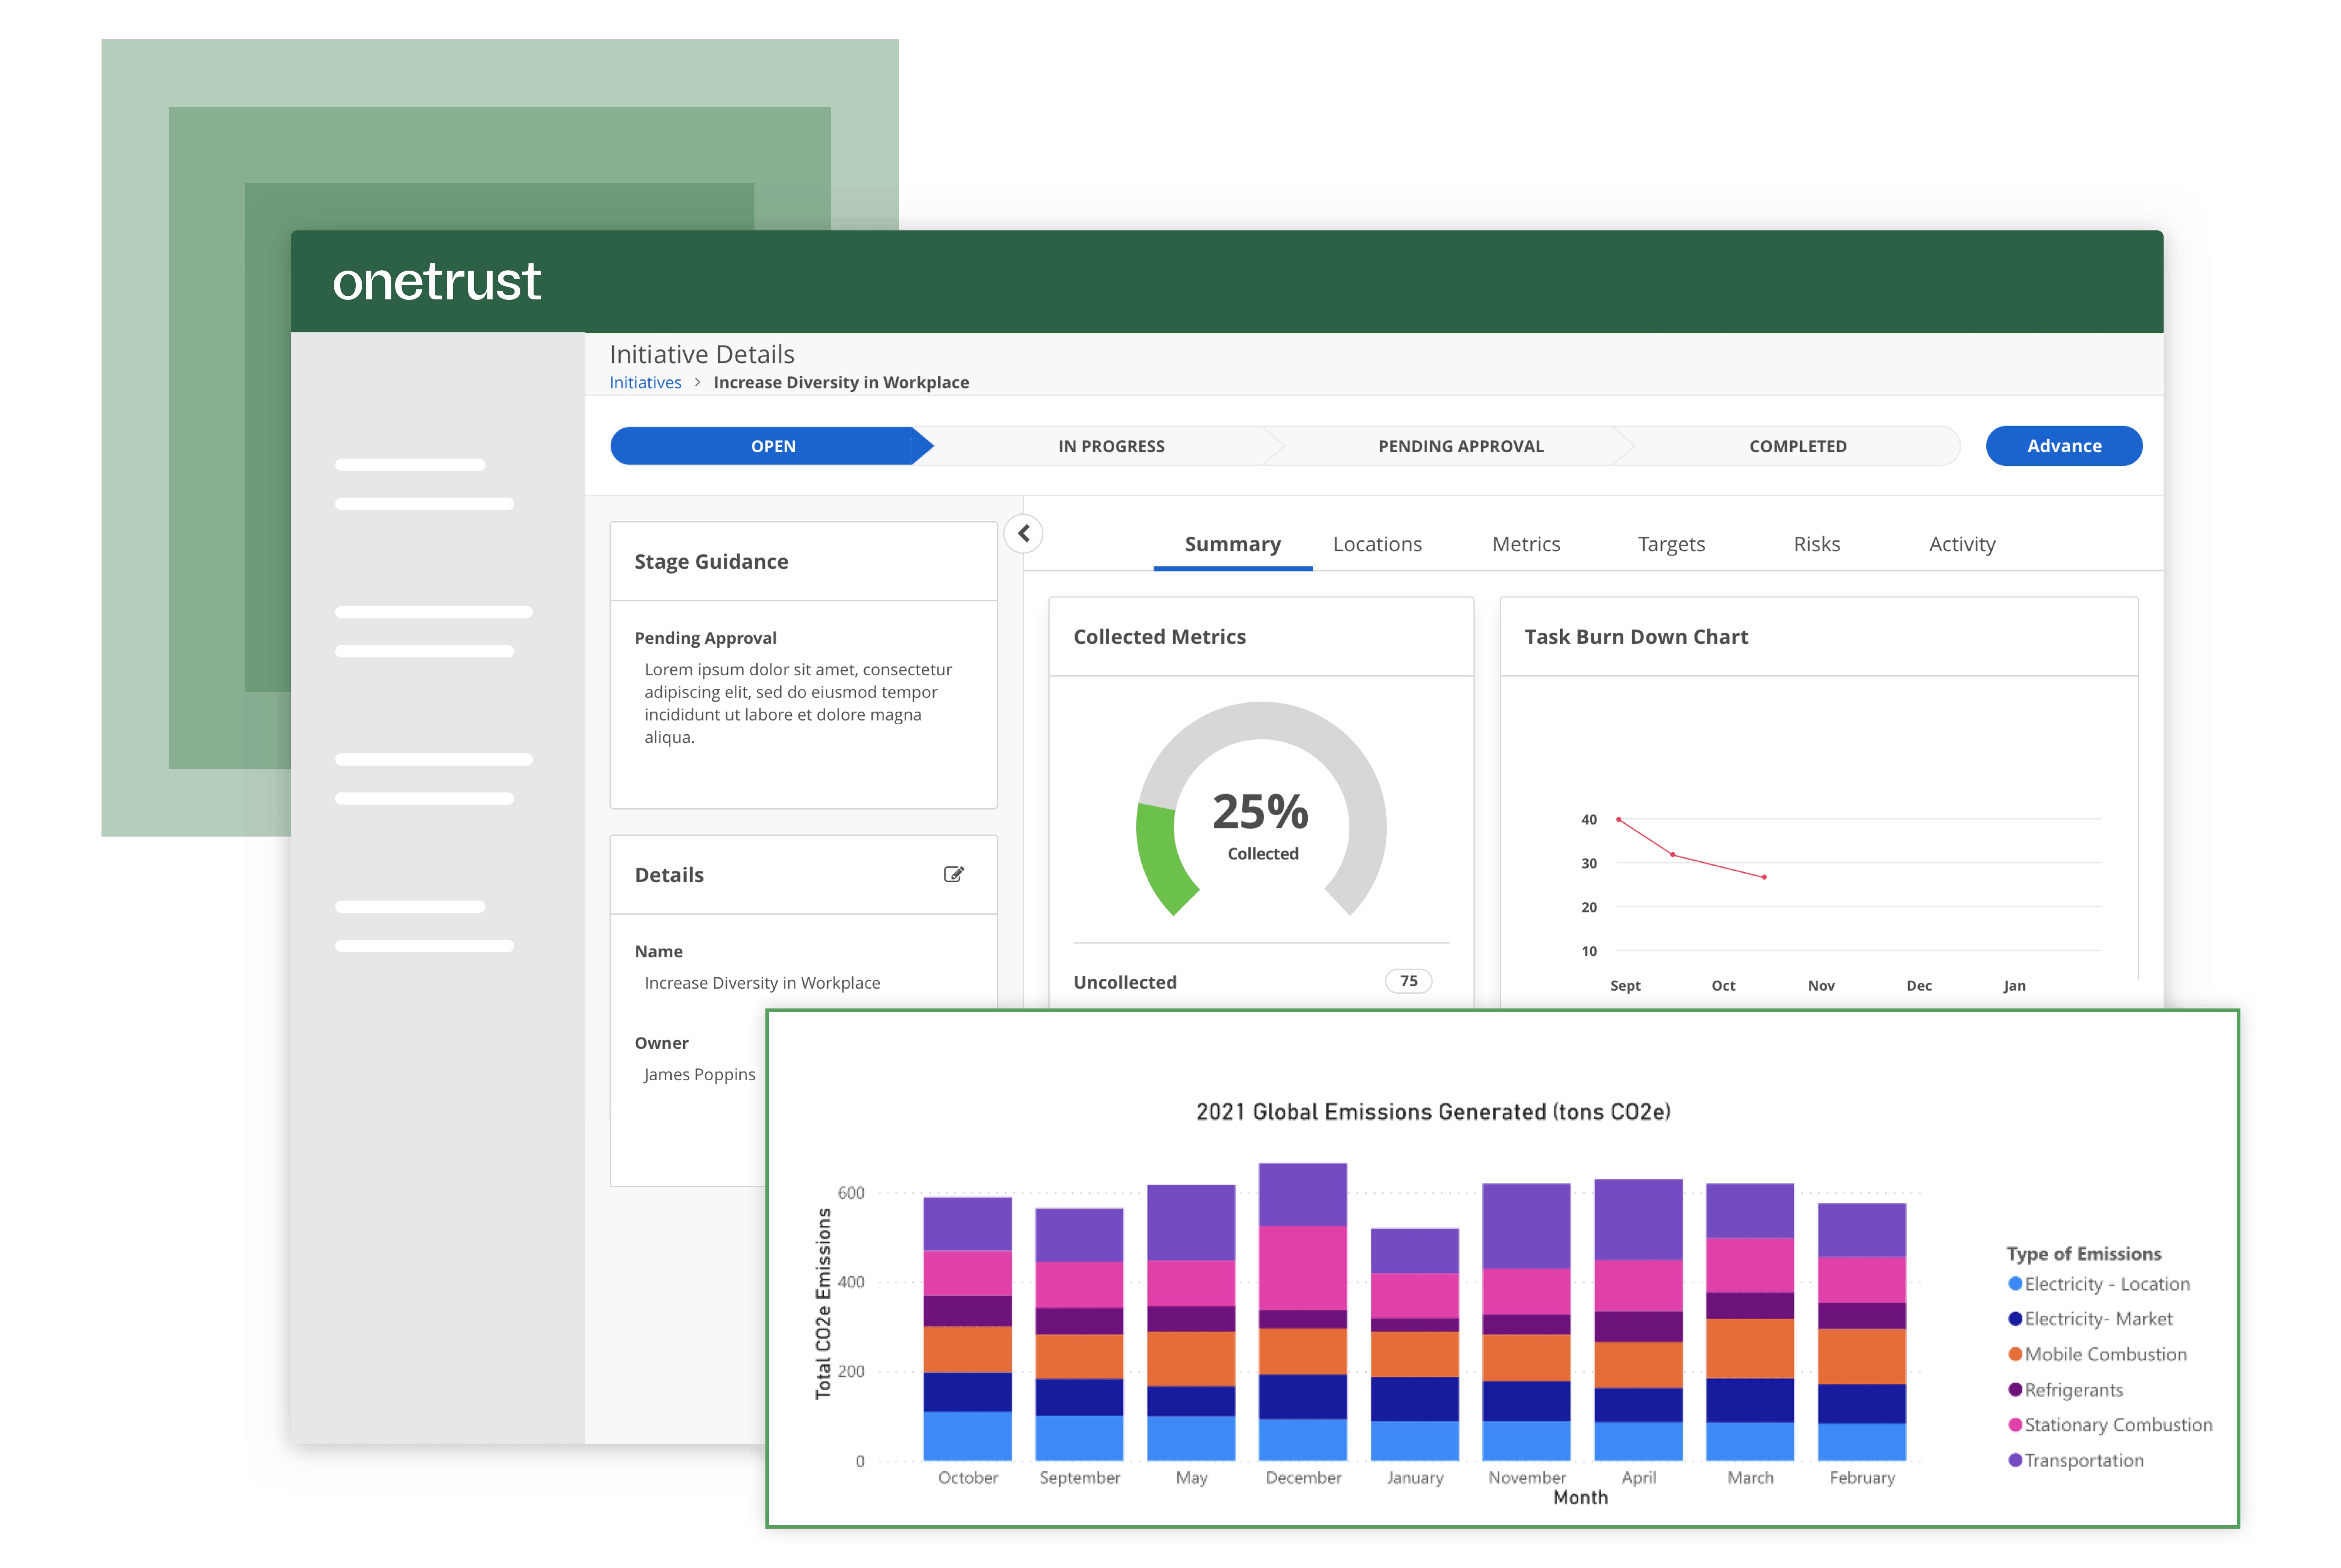 The ESG Program Management module where the details of a diversity initiative can be seen with metrics, workflows, and bar charts.